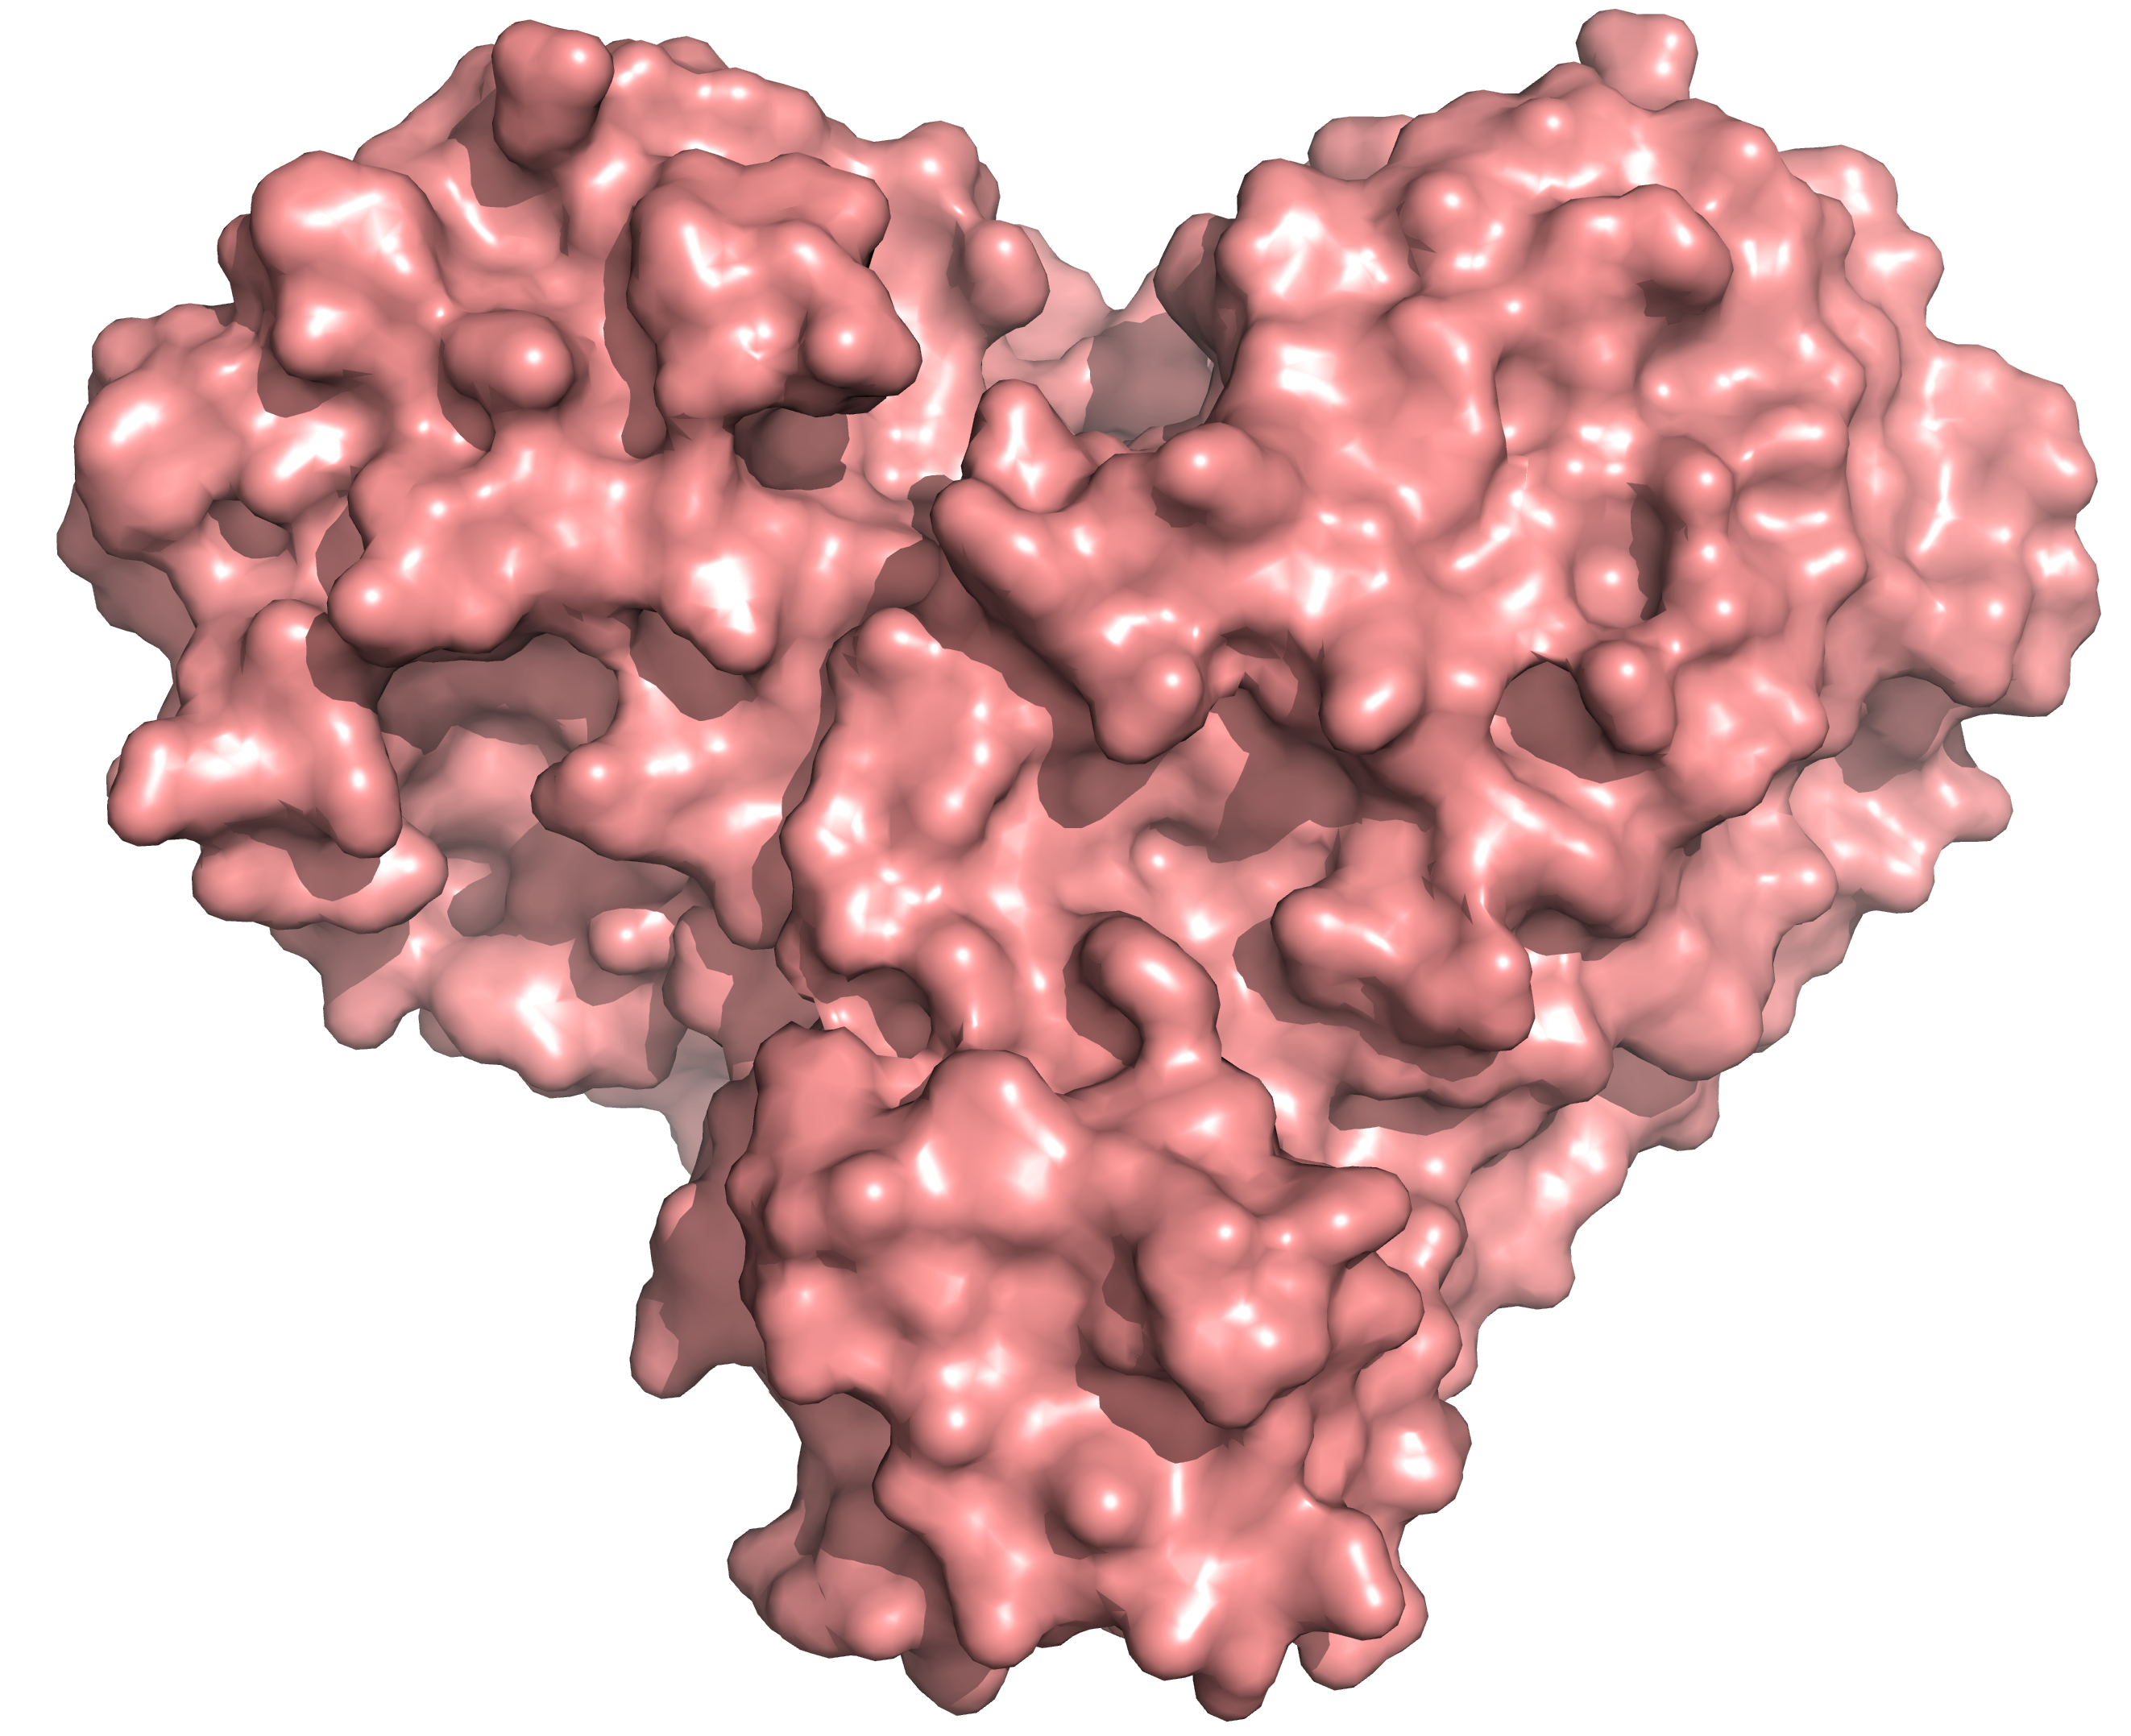 X Rays Size Up Protein Structure At The ‘heart Of Covid 19 Virus Ornl